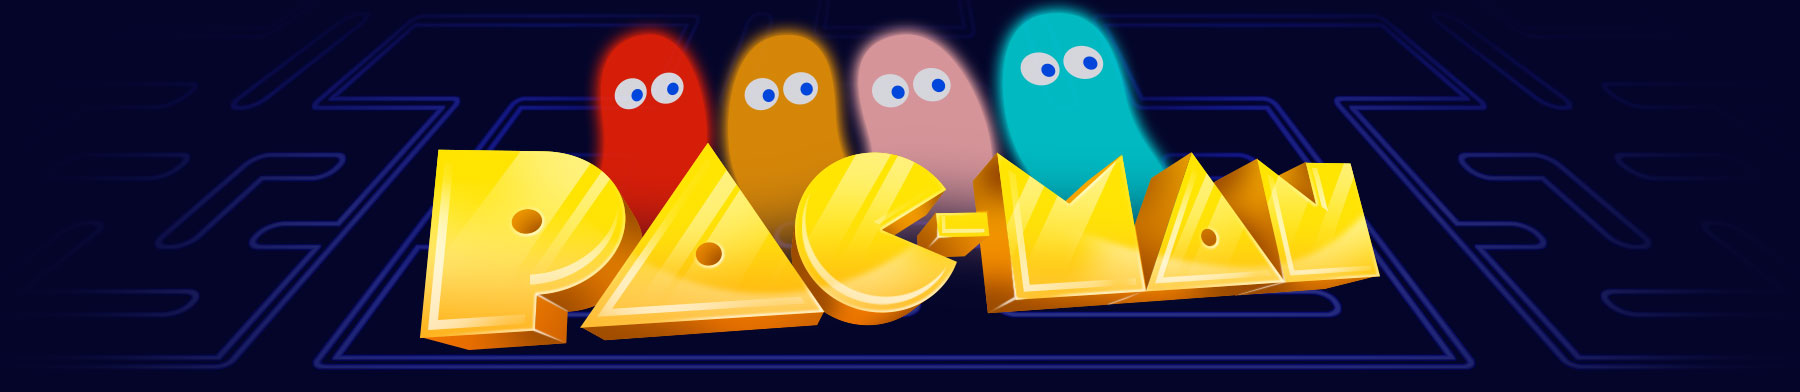 pac man characters